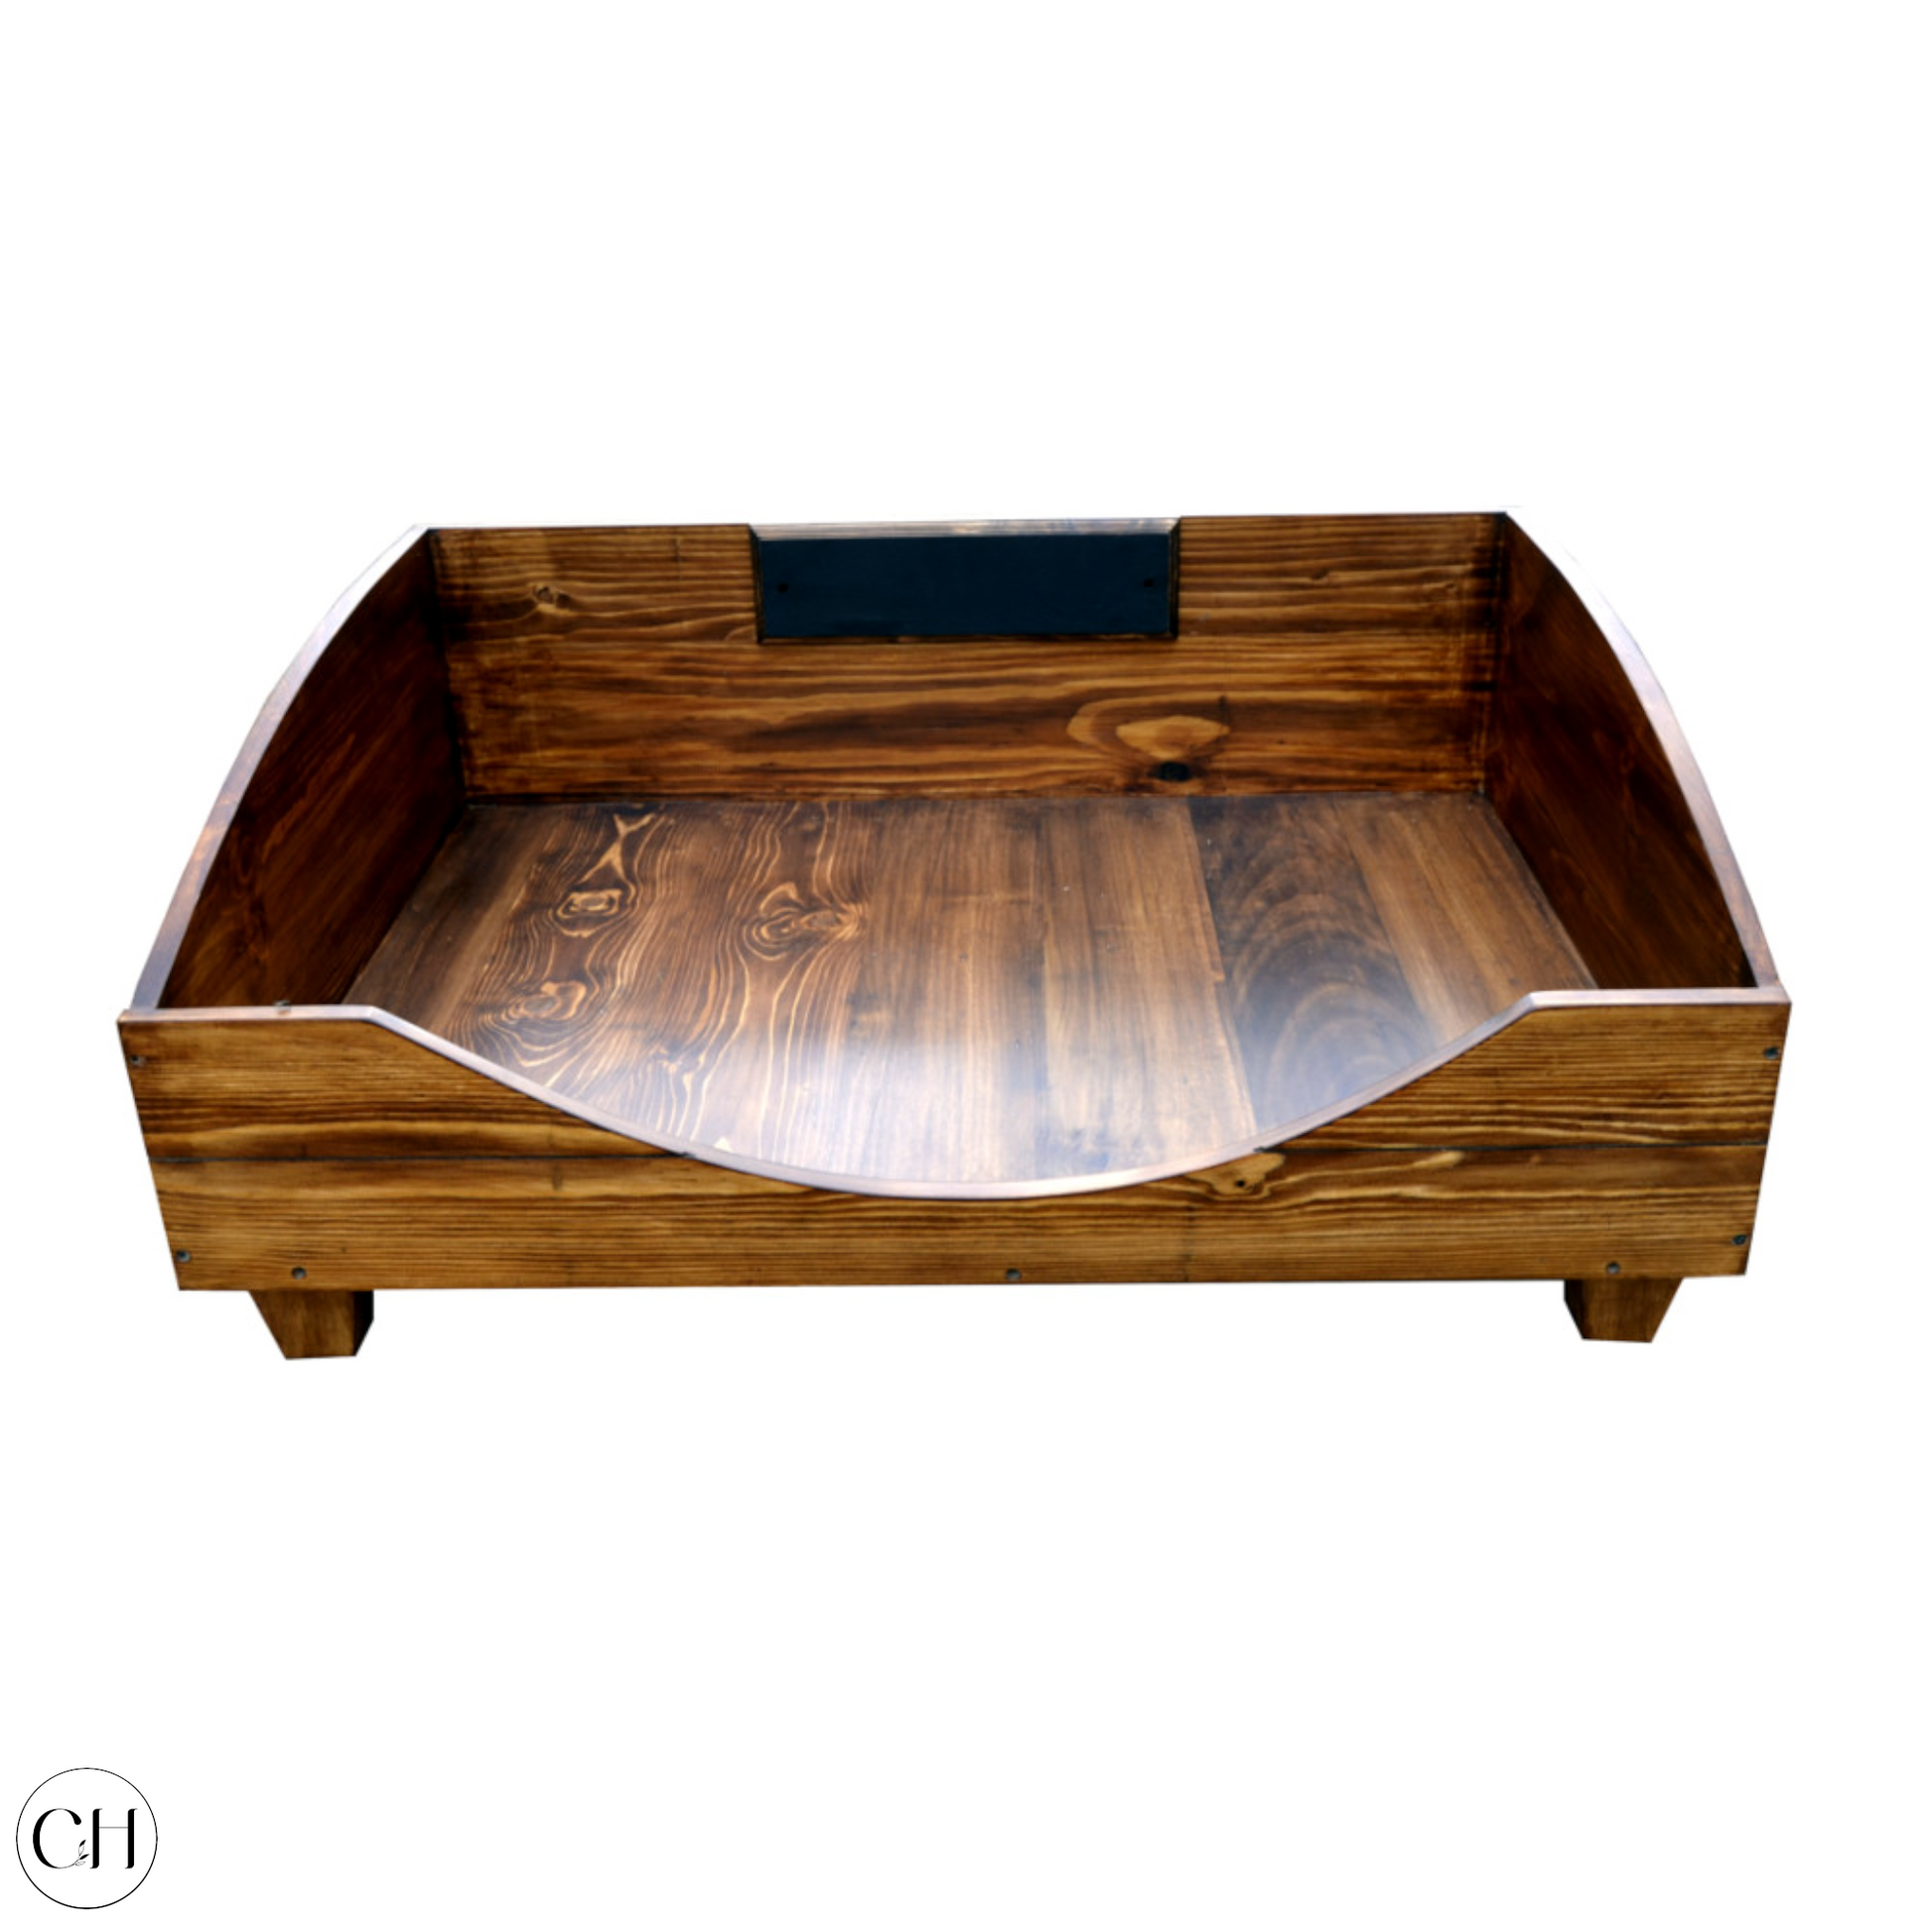 CustHum - Wooden dog bed with blackboard nameplate on the back panel (front)